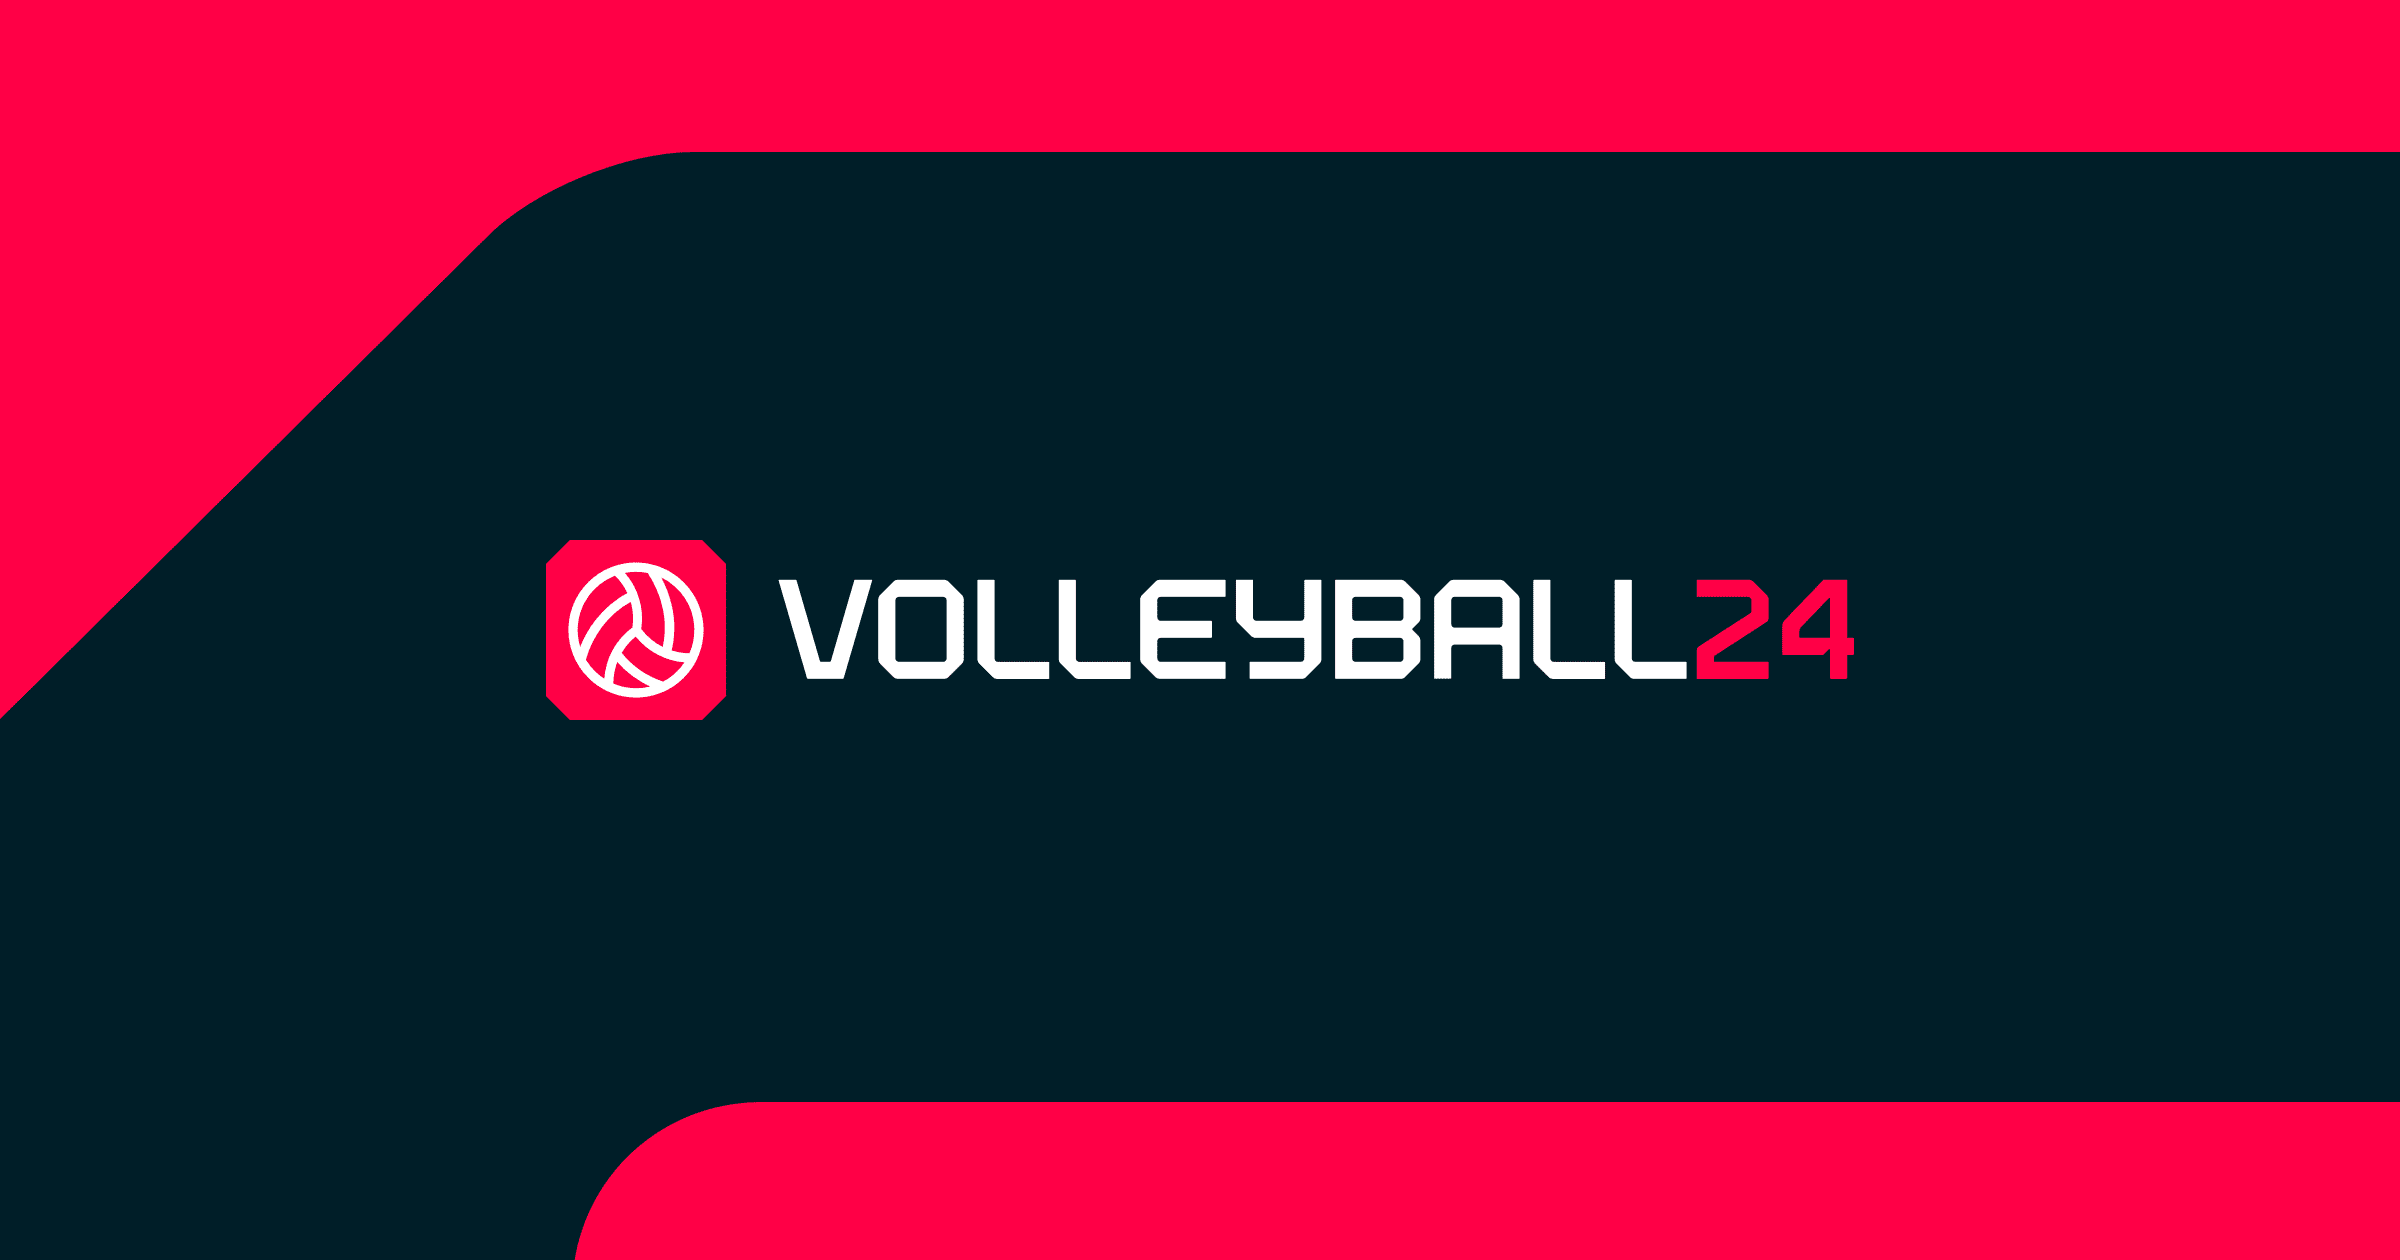 nowgoal volleyball